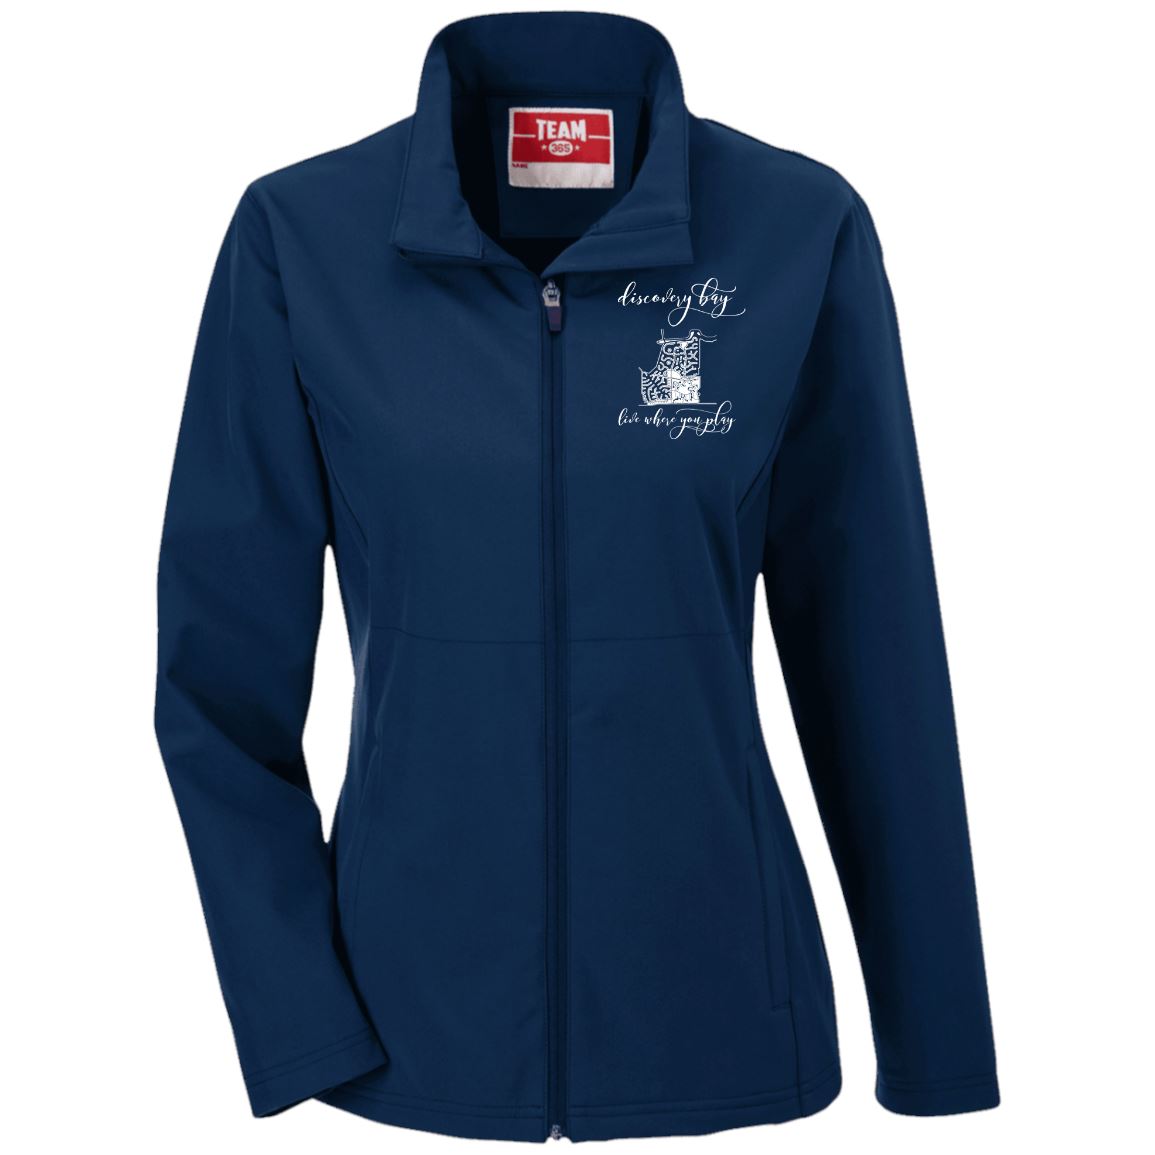 Discovery Bay Embroidered Ladies' Soft Shell Jacket - Houseboat Kings